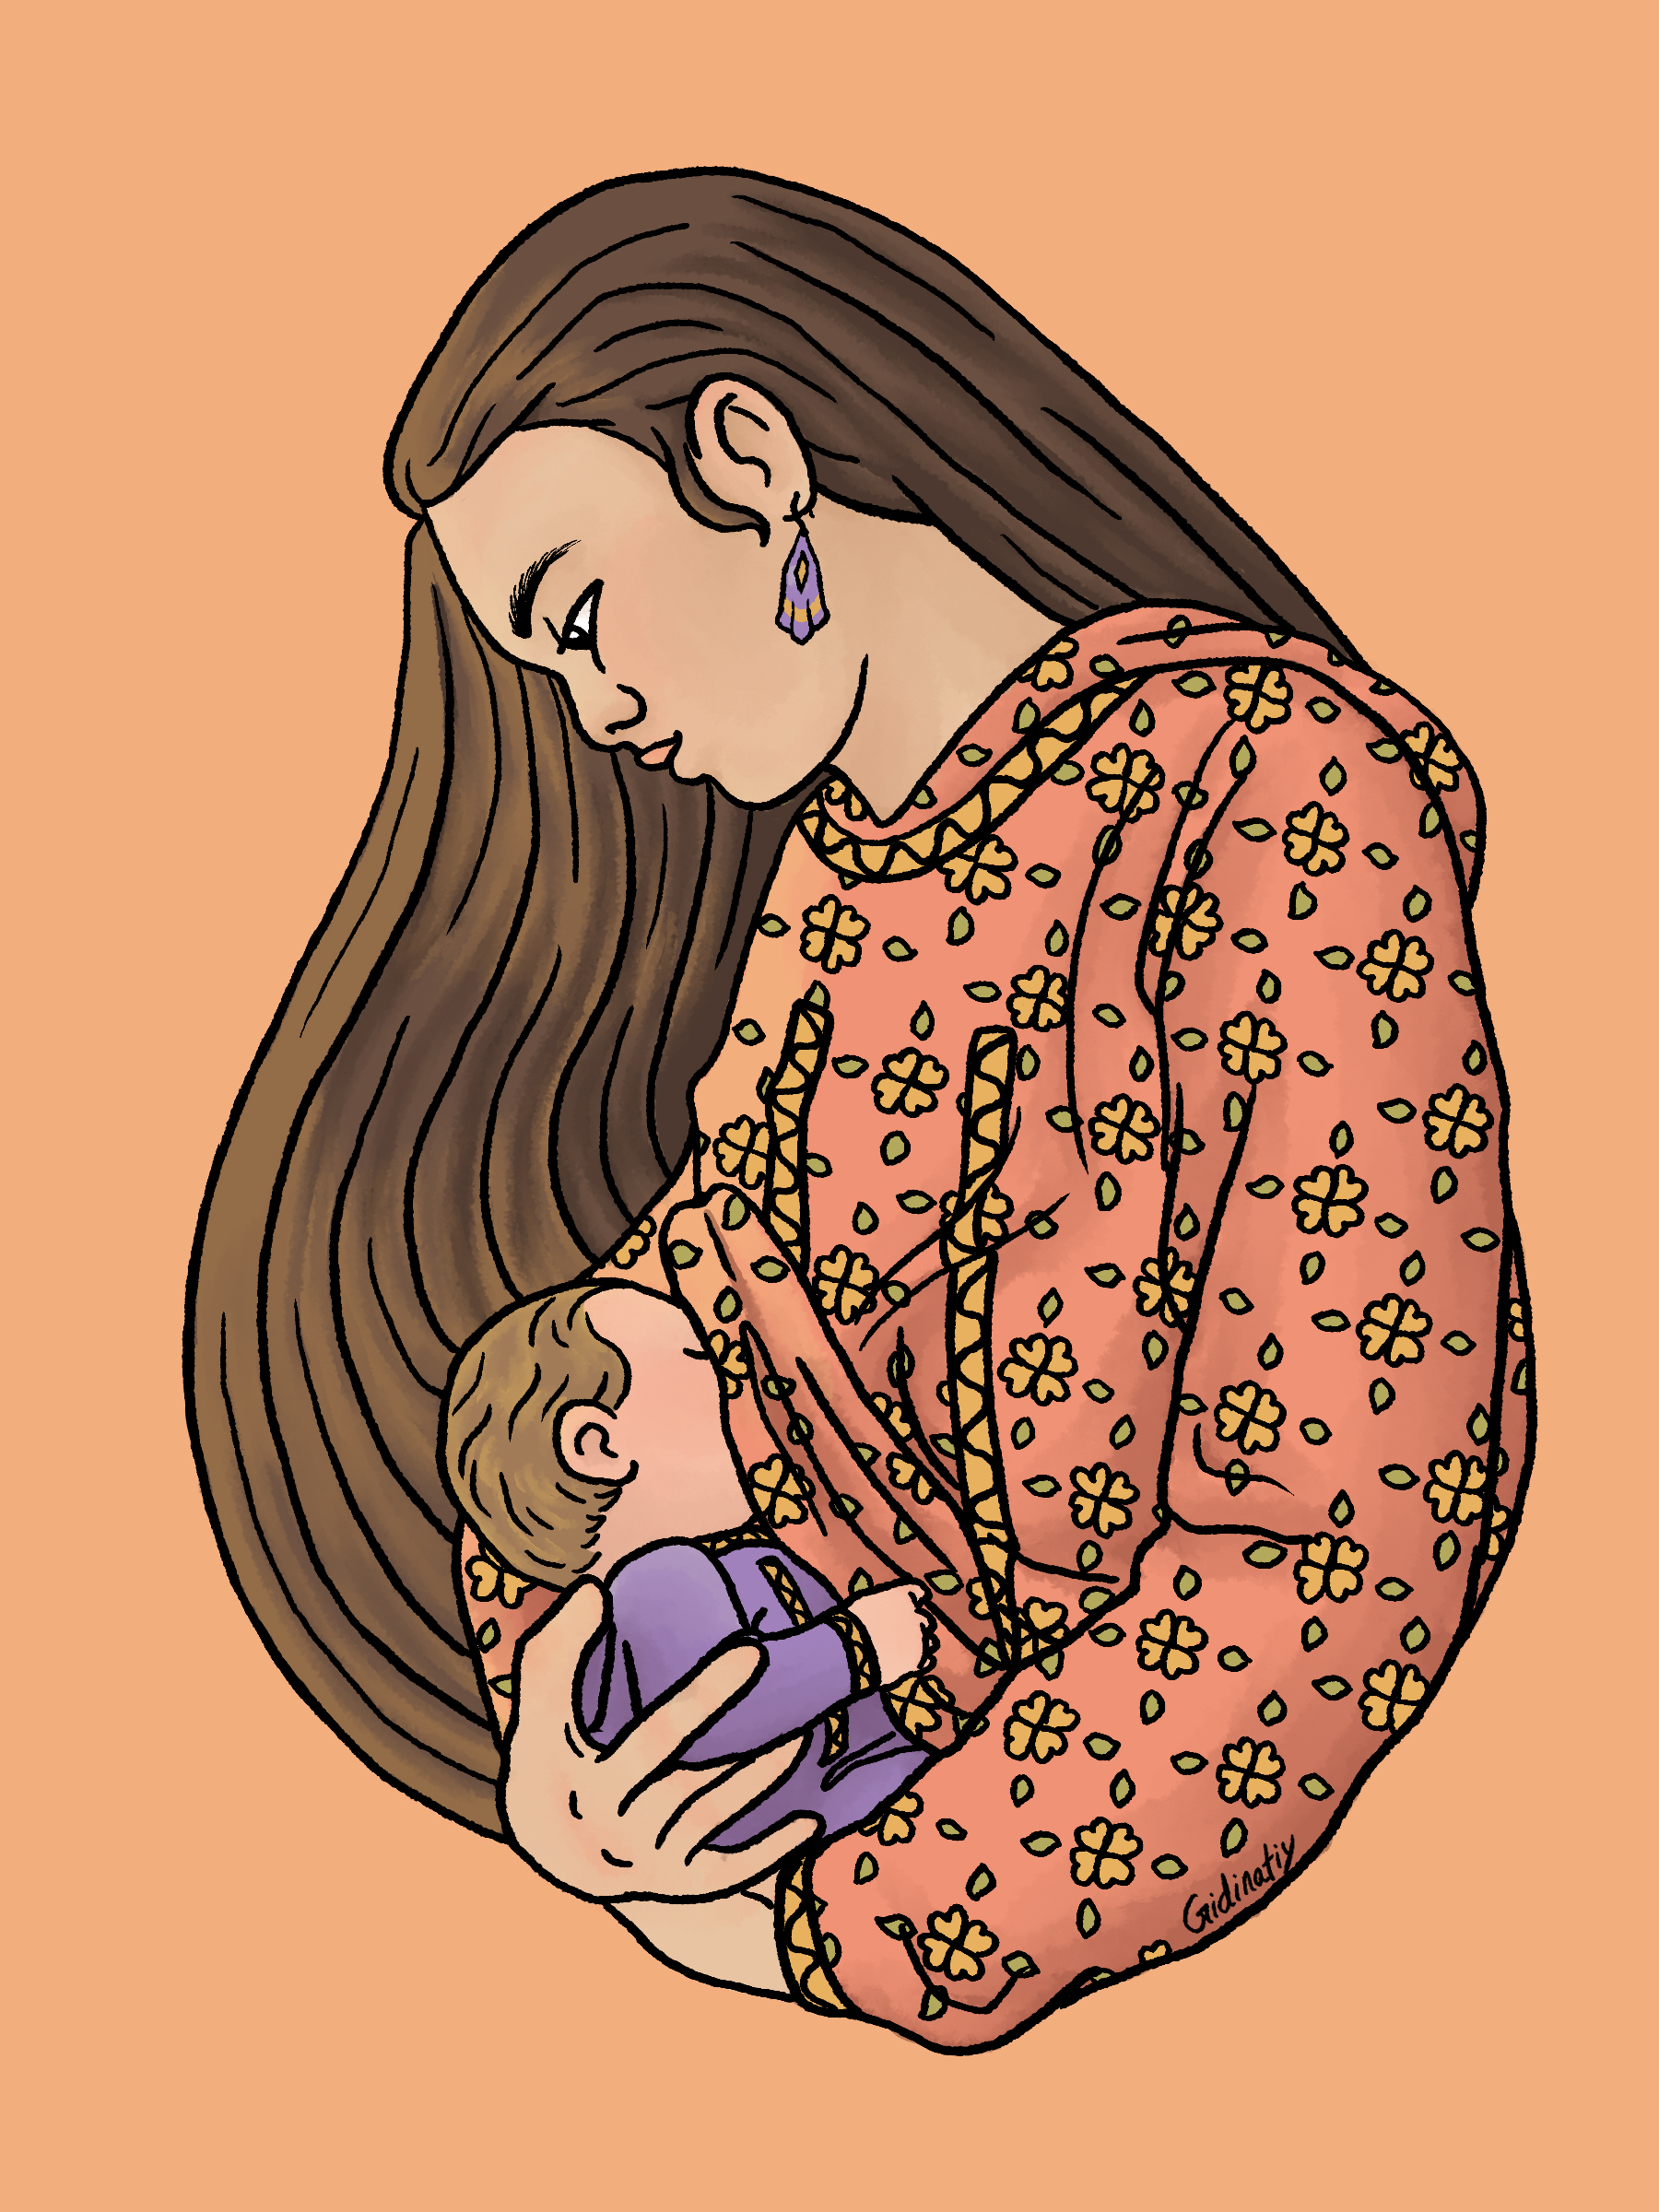 Illustration of a Native Alaskan woman breastfeeding her baby, image courtesy of the artist